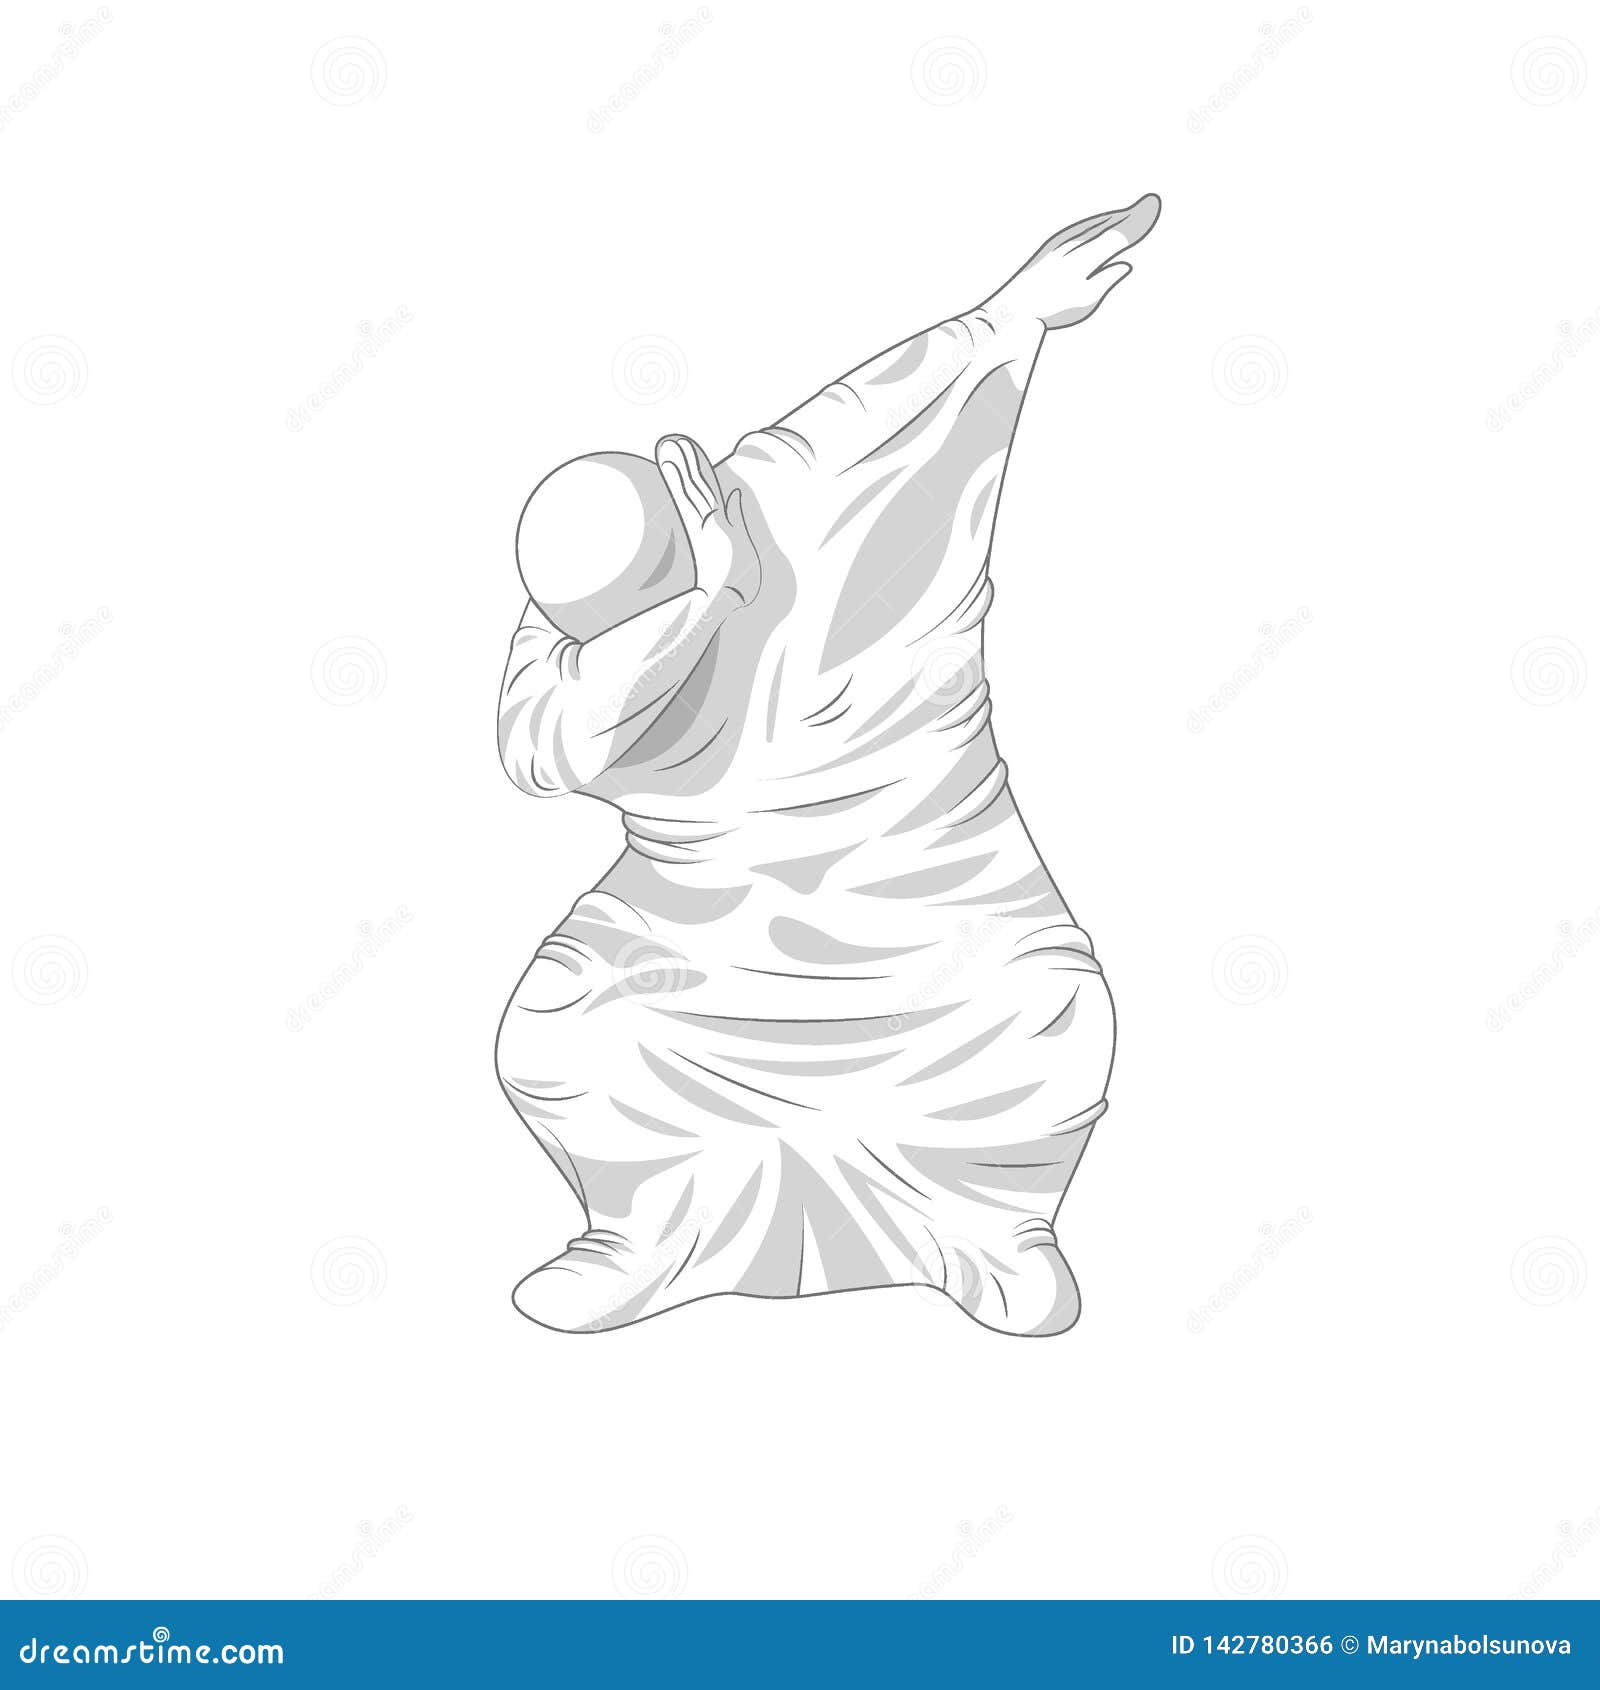 ghost specter character dancing dab step